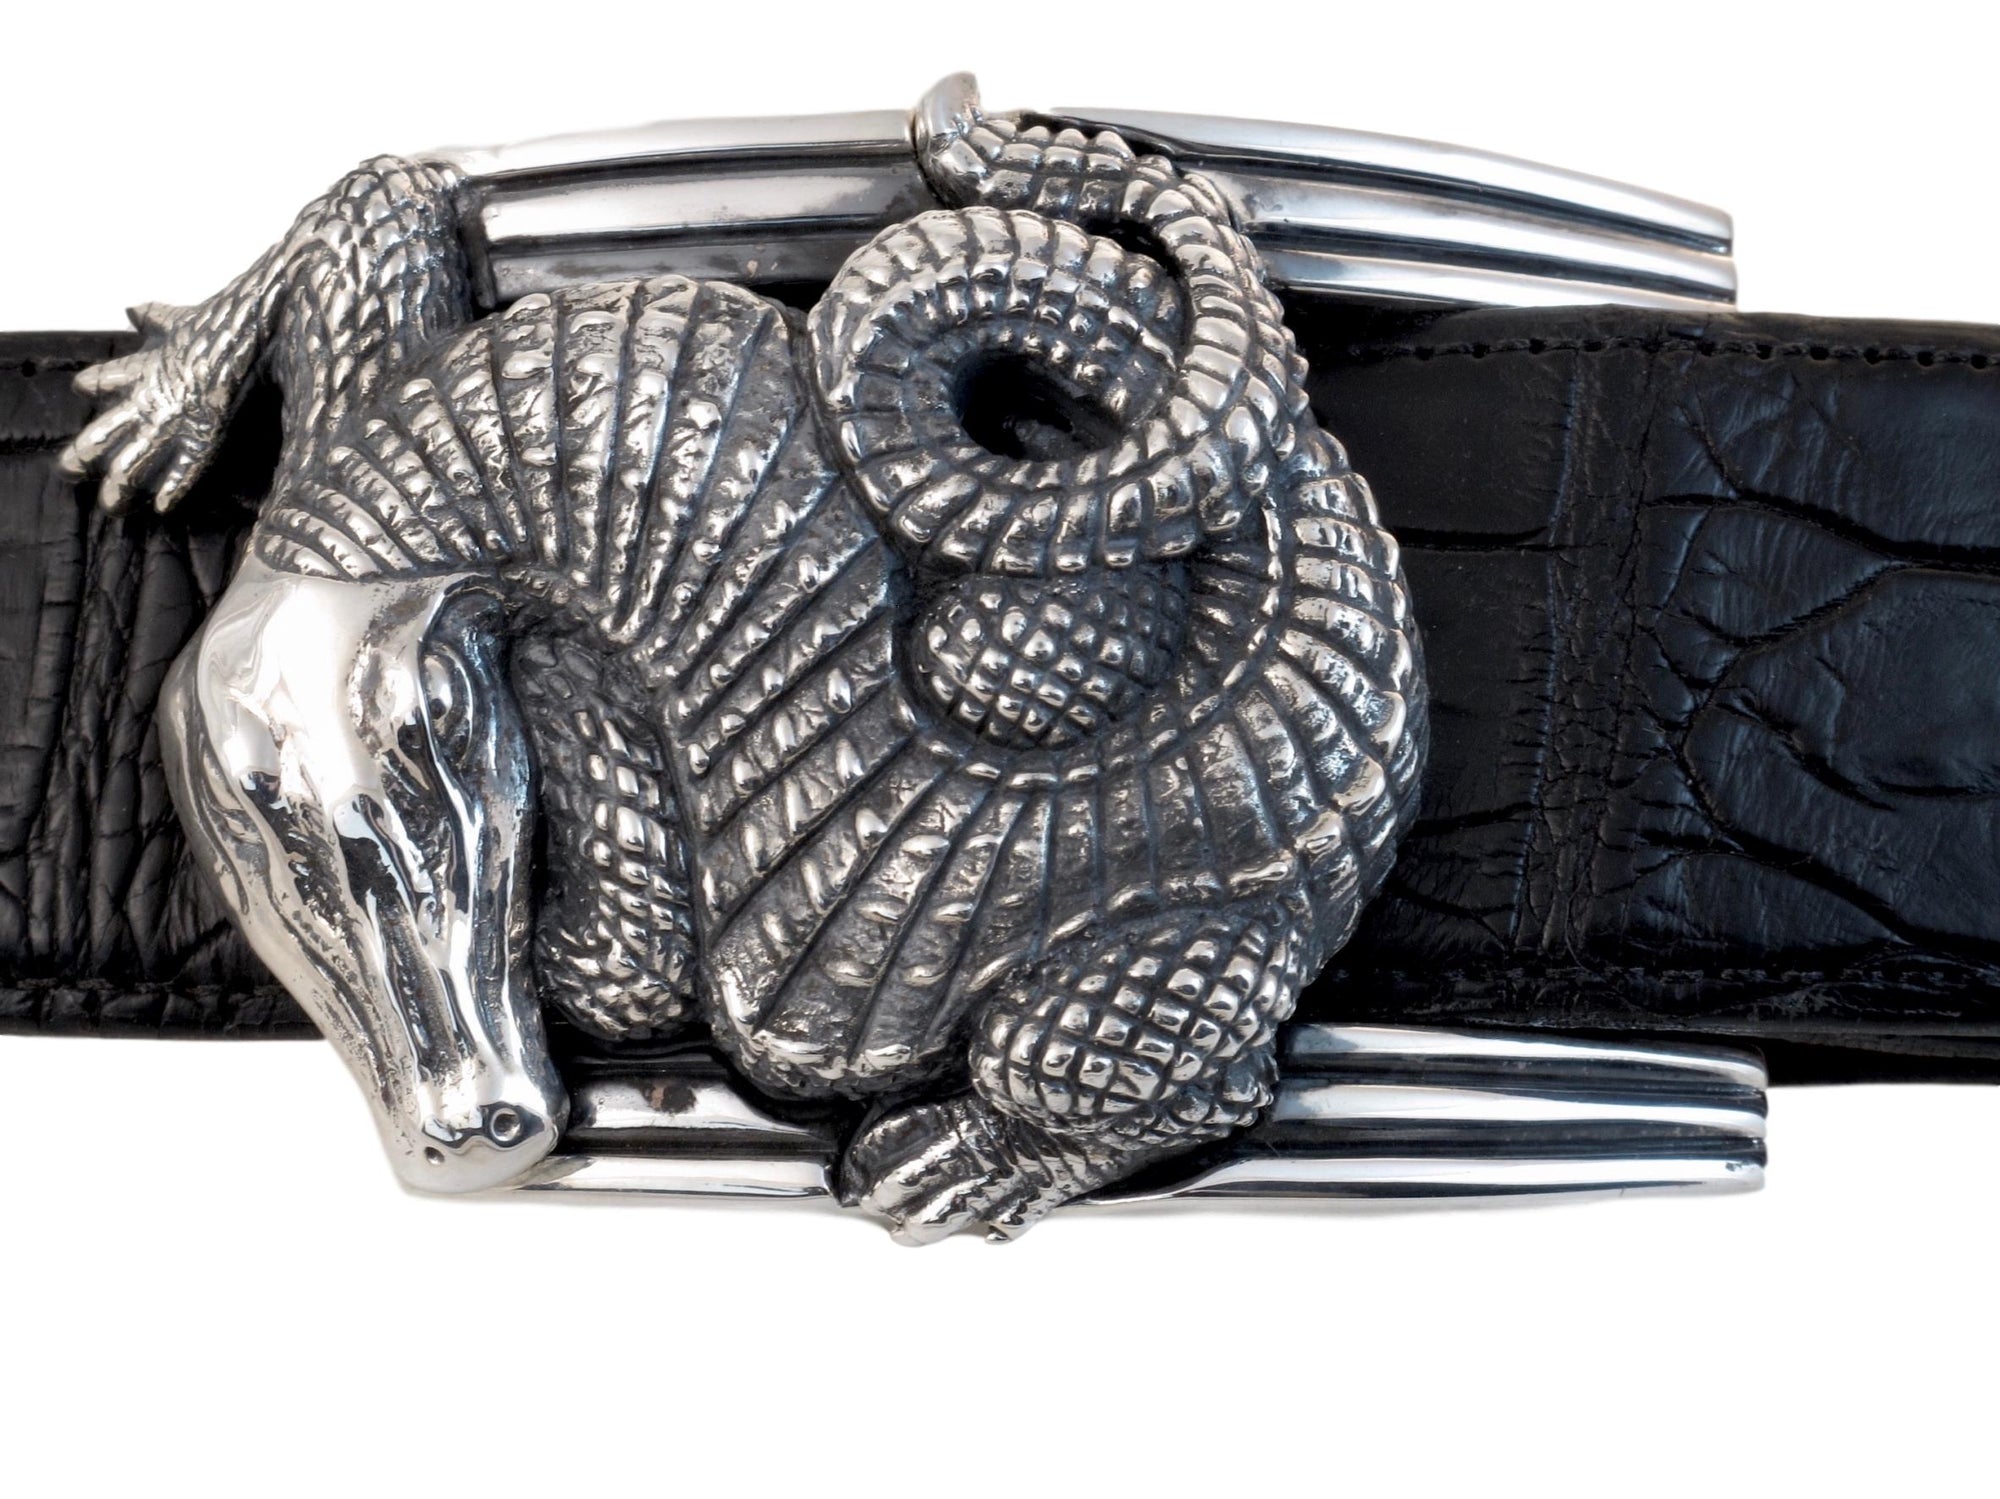 Front view of the Sterling Curved Alligator buckle showig its curled body resting on the polished buckle frame.